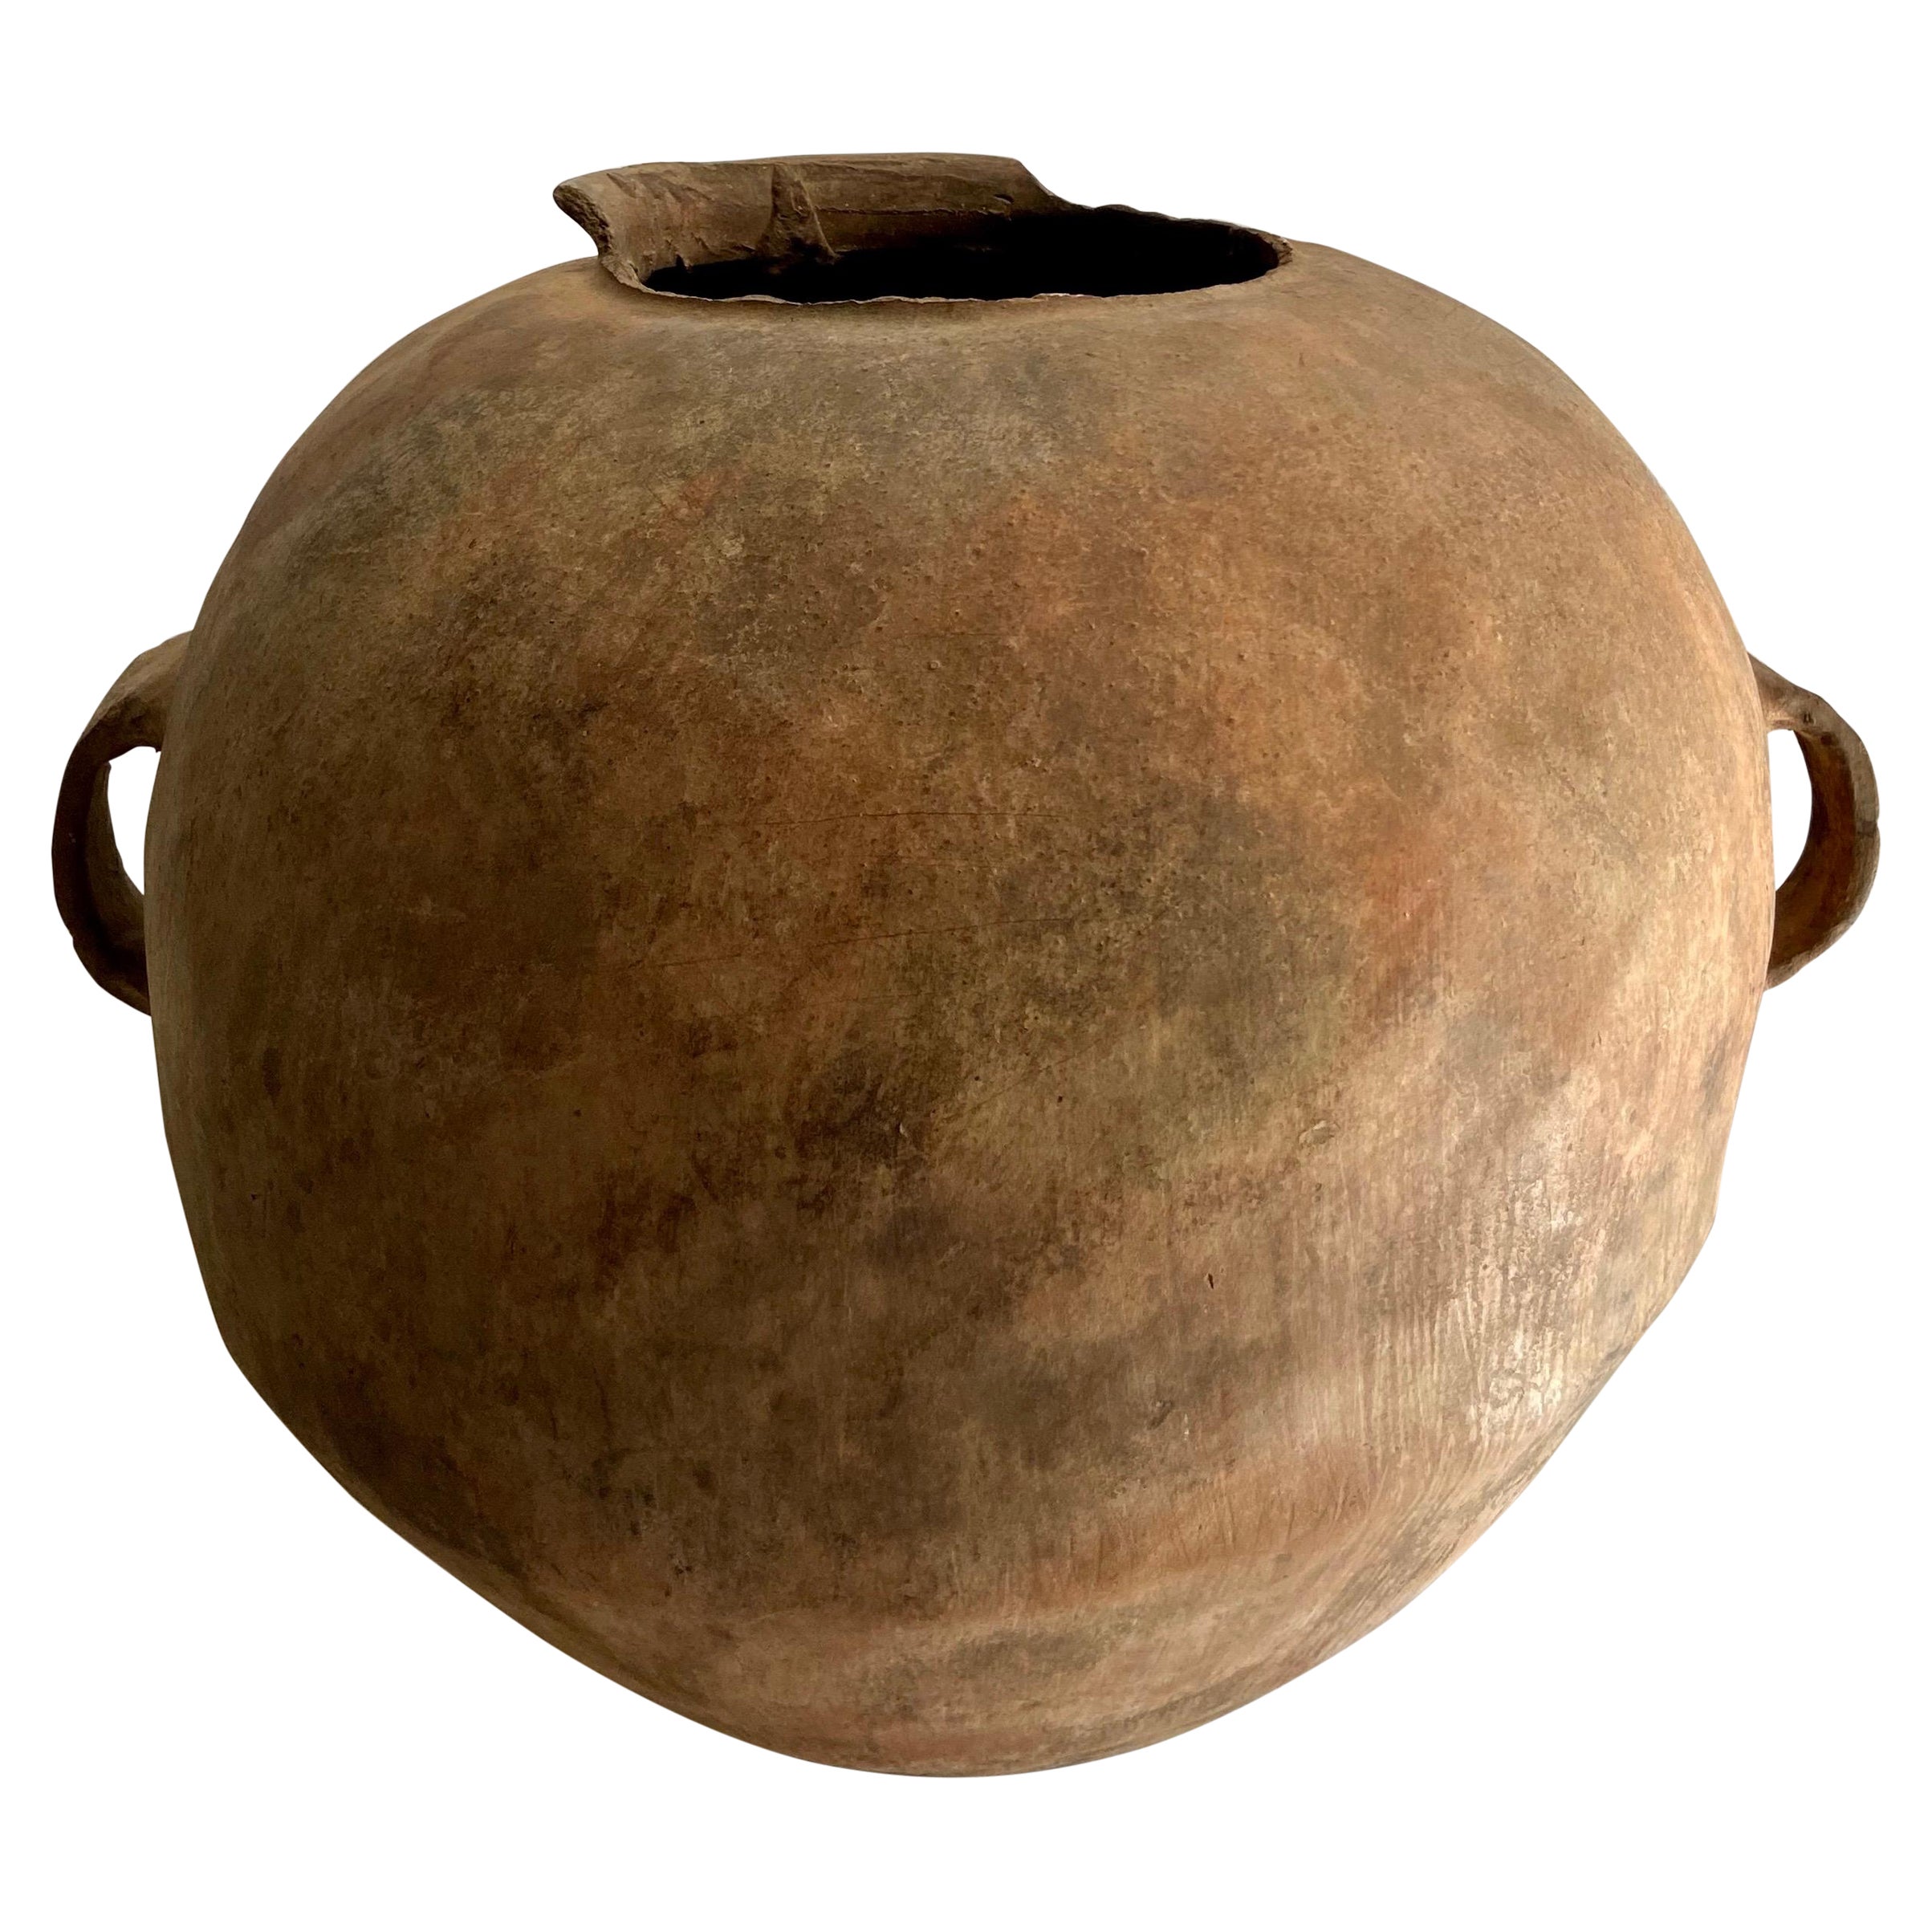 Early 19th Century Terracotta Water Jar from Mexico